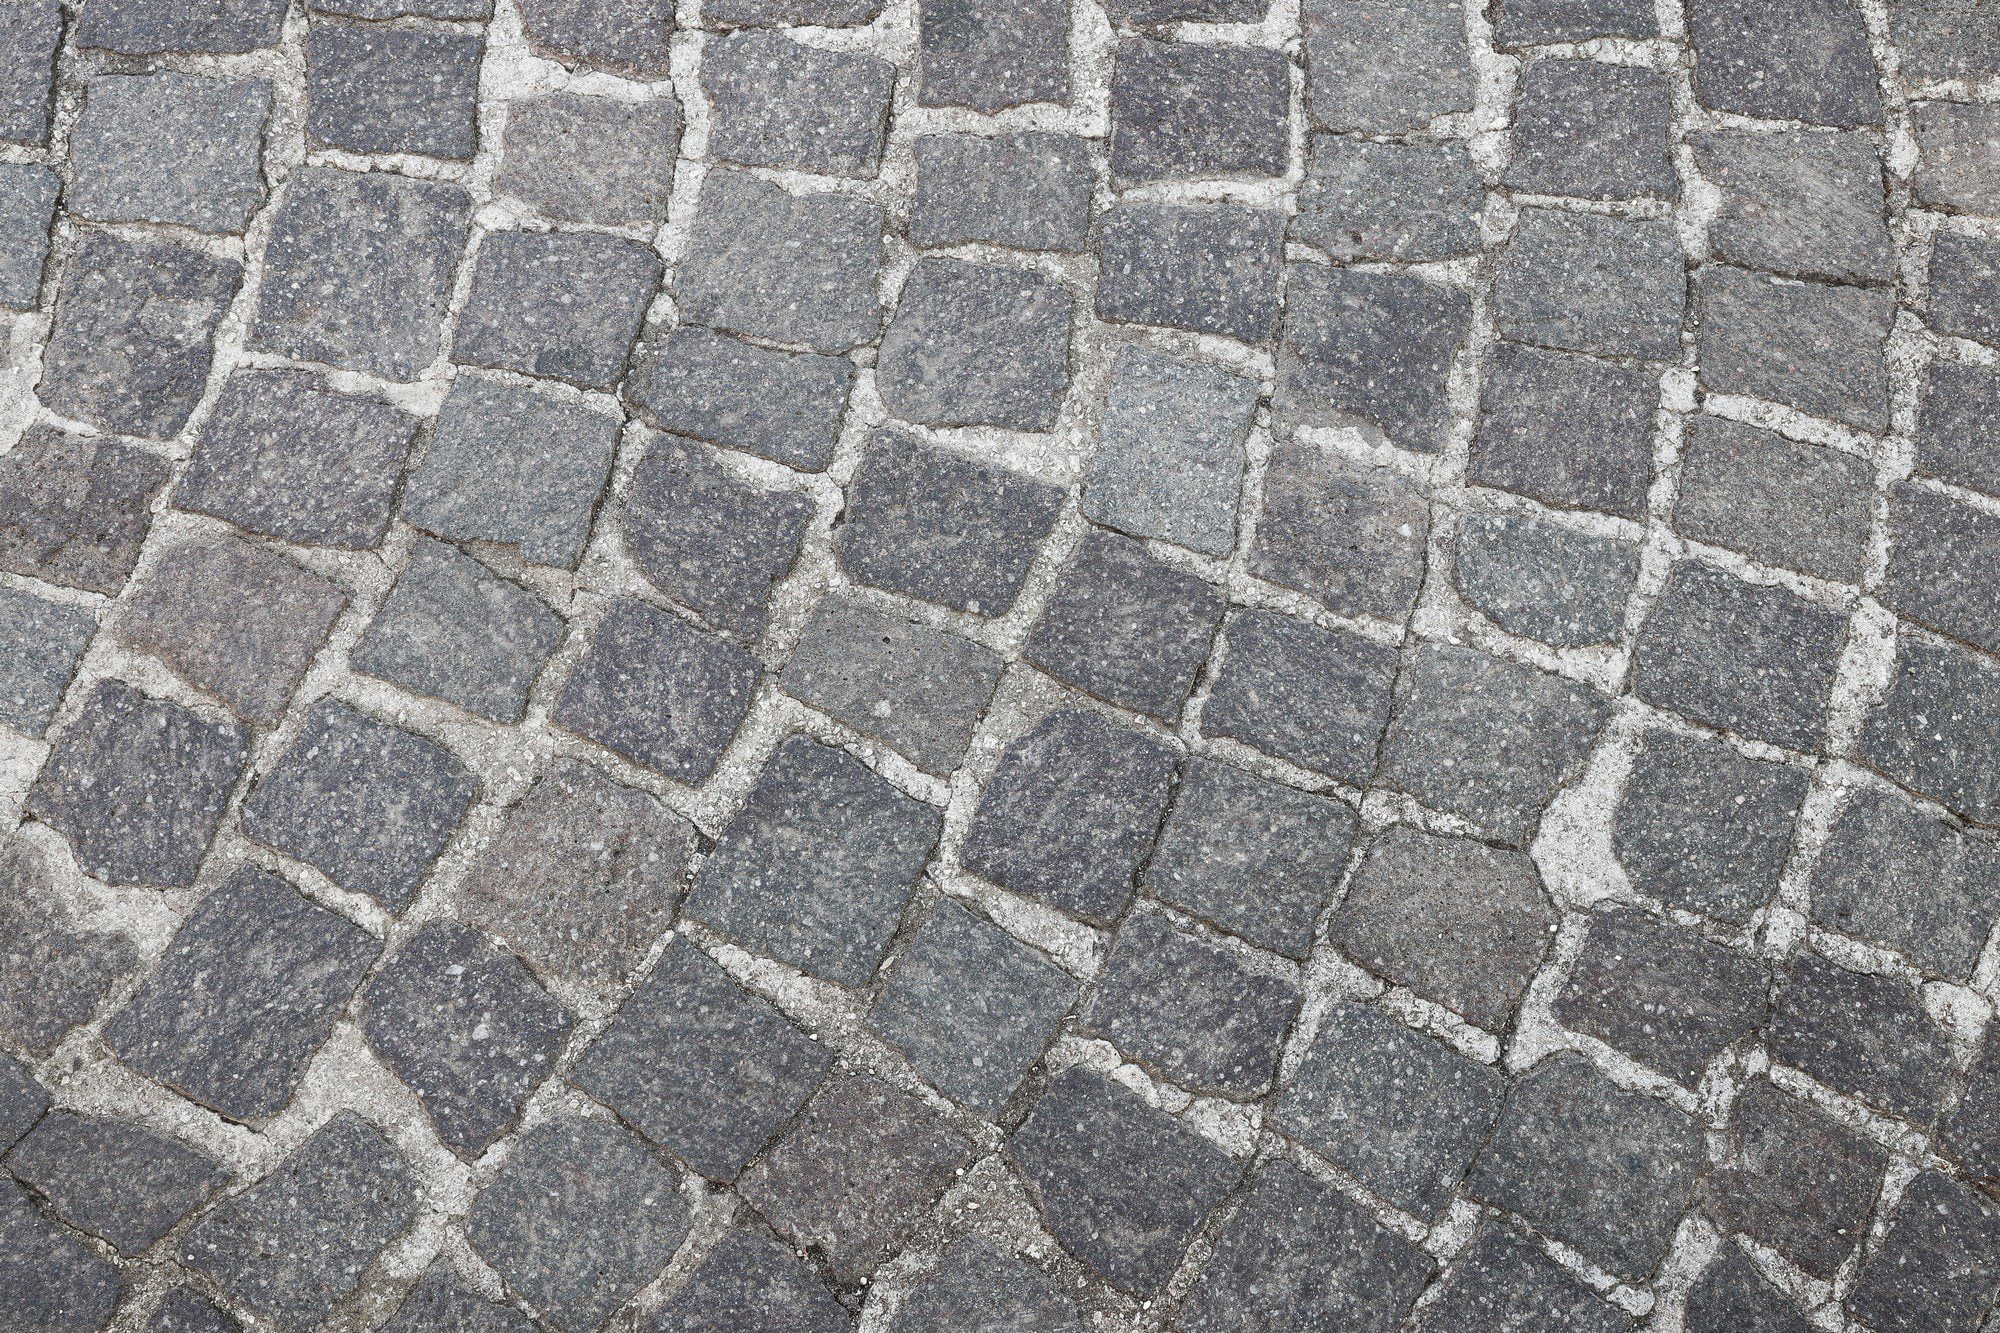 The image shows a cobblestone pavement. It consists of irregularly shaped stones arranged in a pattern. The stones vary slightly in colour but are mostly shades of gray. There are visible gaps filled with a cement or mortar between the stones, outlining each cobblestone and providing contrast to the pattern. This type of pavement is commonly seen in historical or older parts of cities, adding a traditional and sometimes rustic aesthetic to streets and walkways.